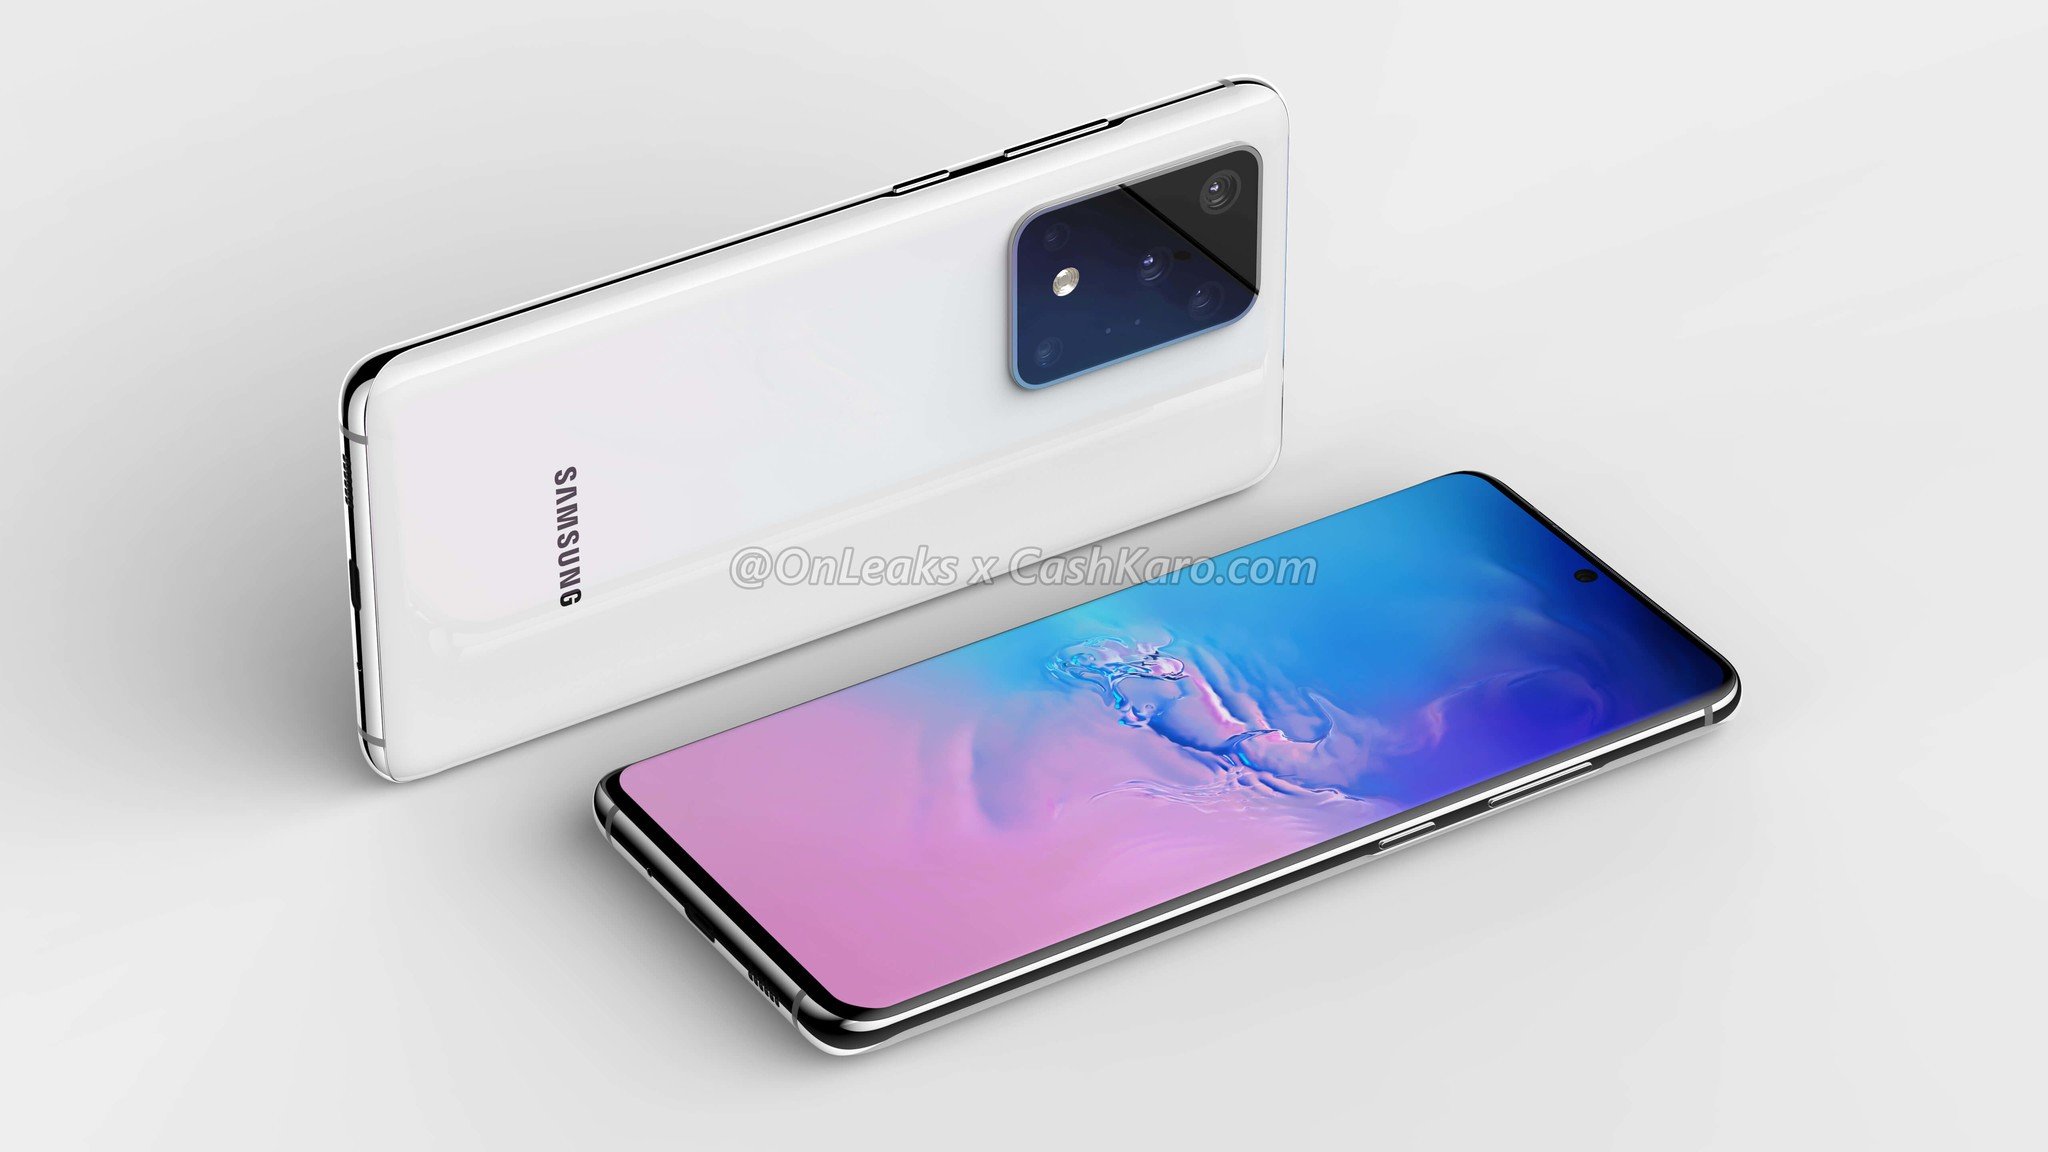 https://www.androidcentral.com/sites/androidcentral.com/files/styles/large/public/article_images/2019/11/galaxy-s11-plus-leak-1.jpg?itok=KAmcAC94